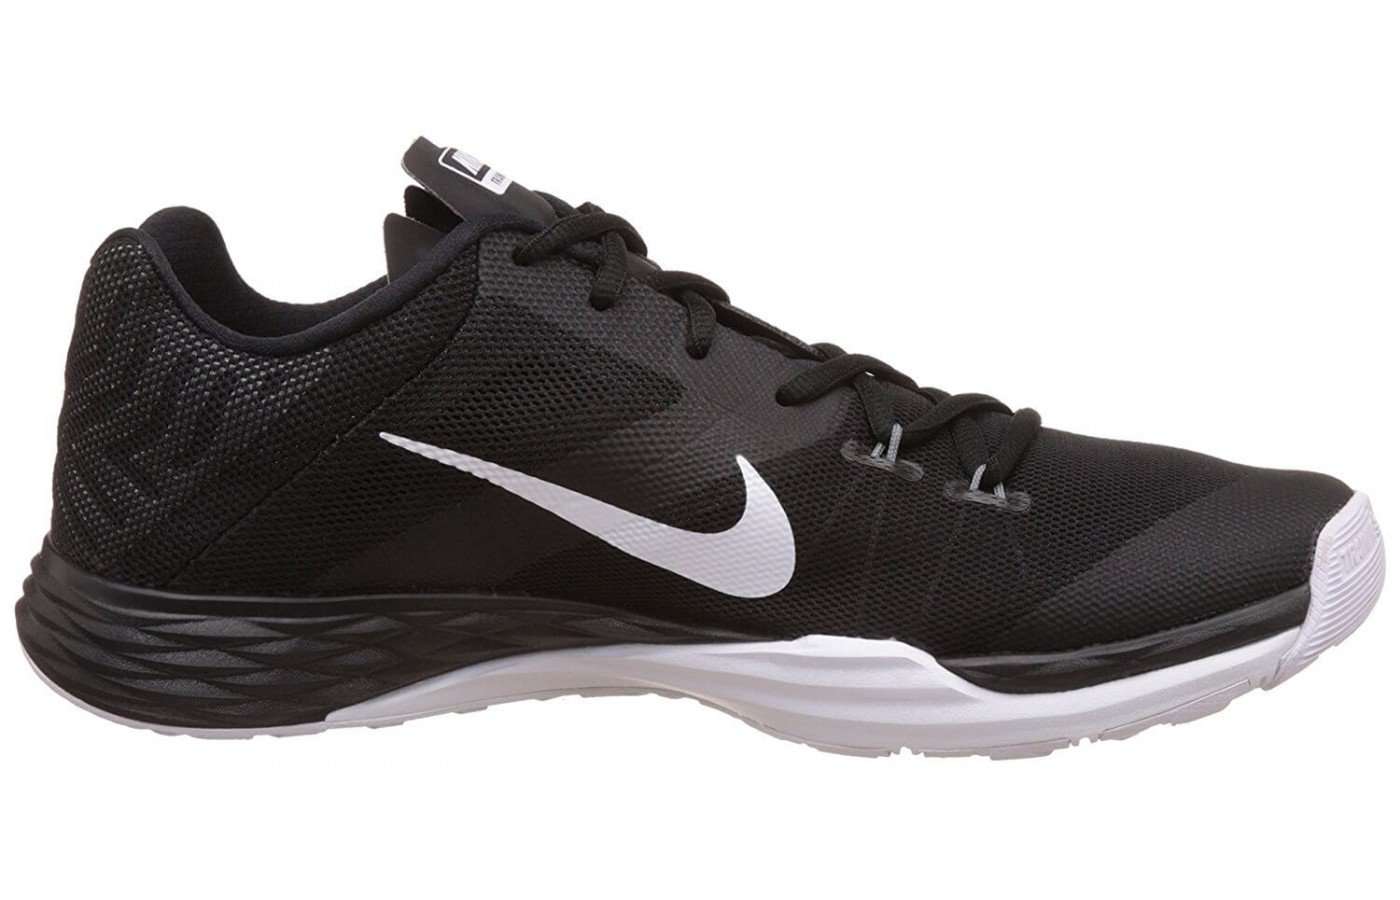 Nike Train Prime Iron Dual Fusion Review - To buy or not in 2023 ...